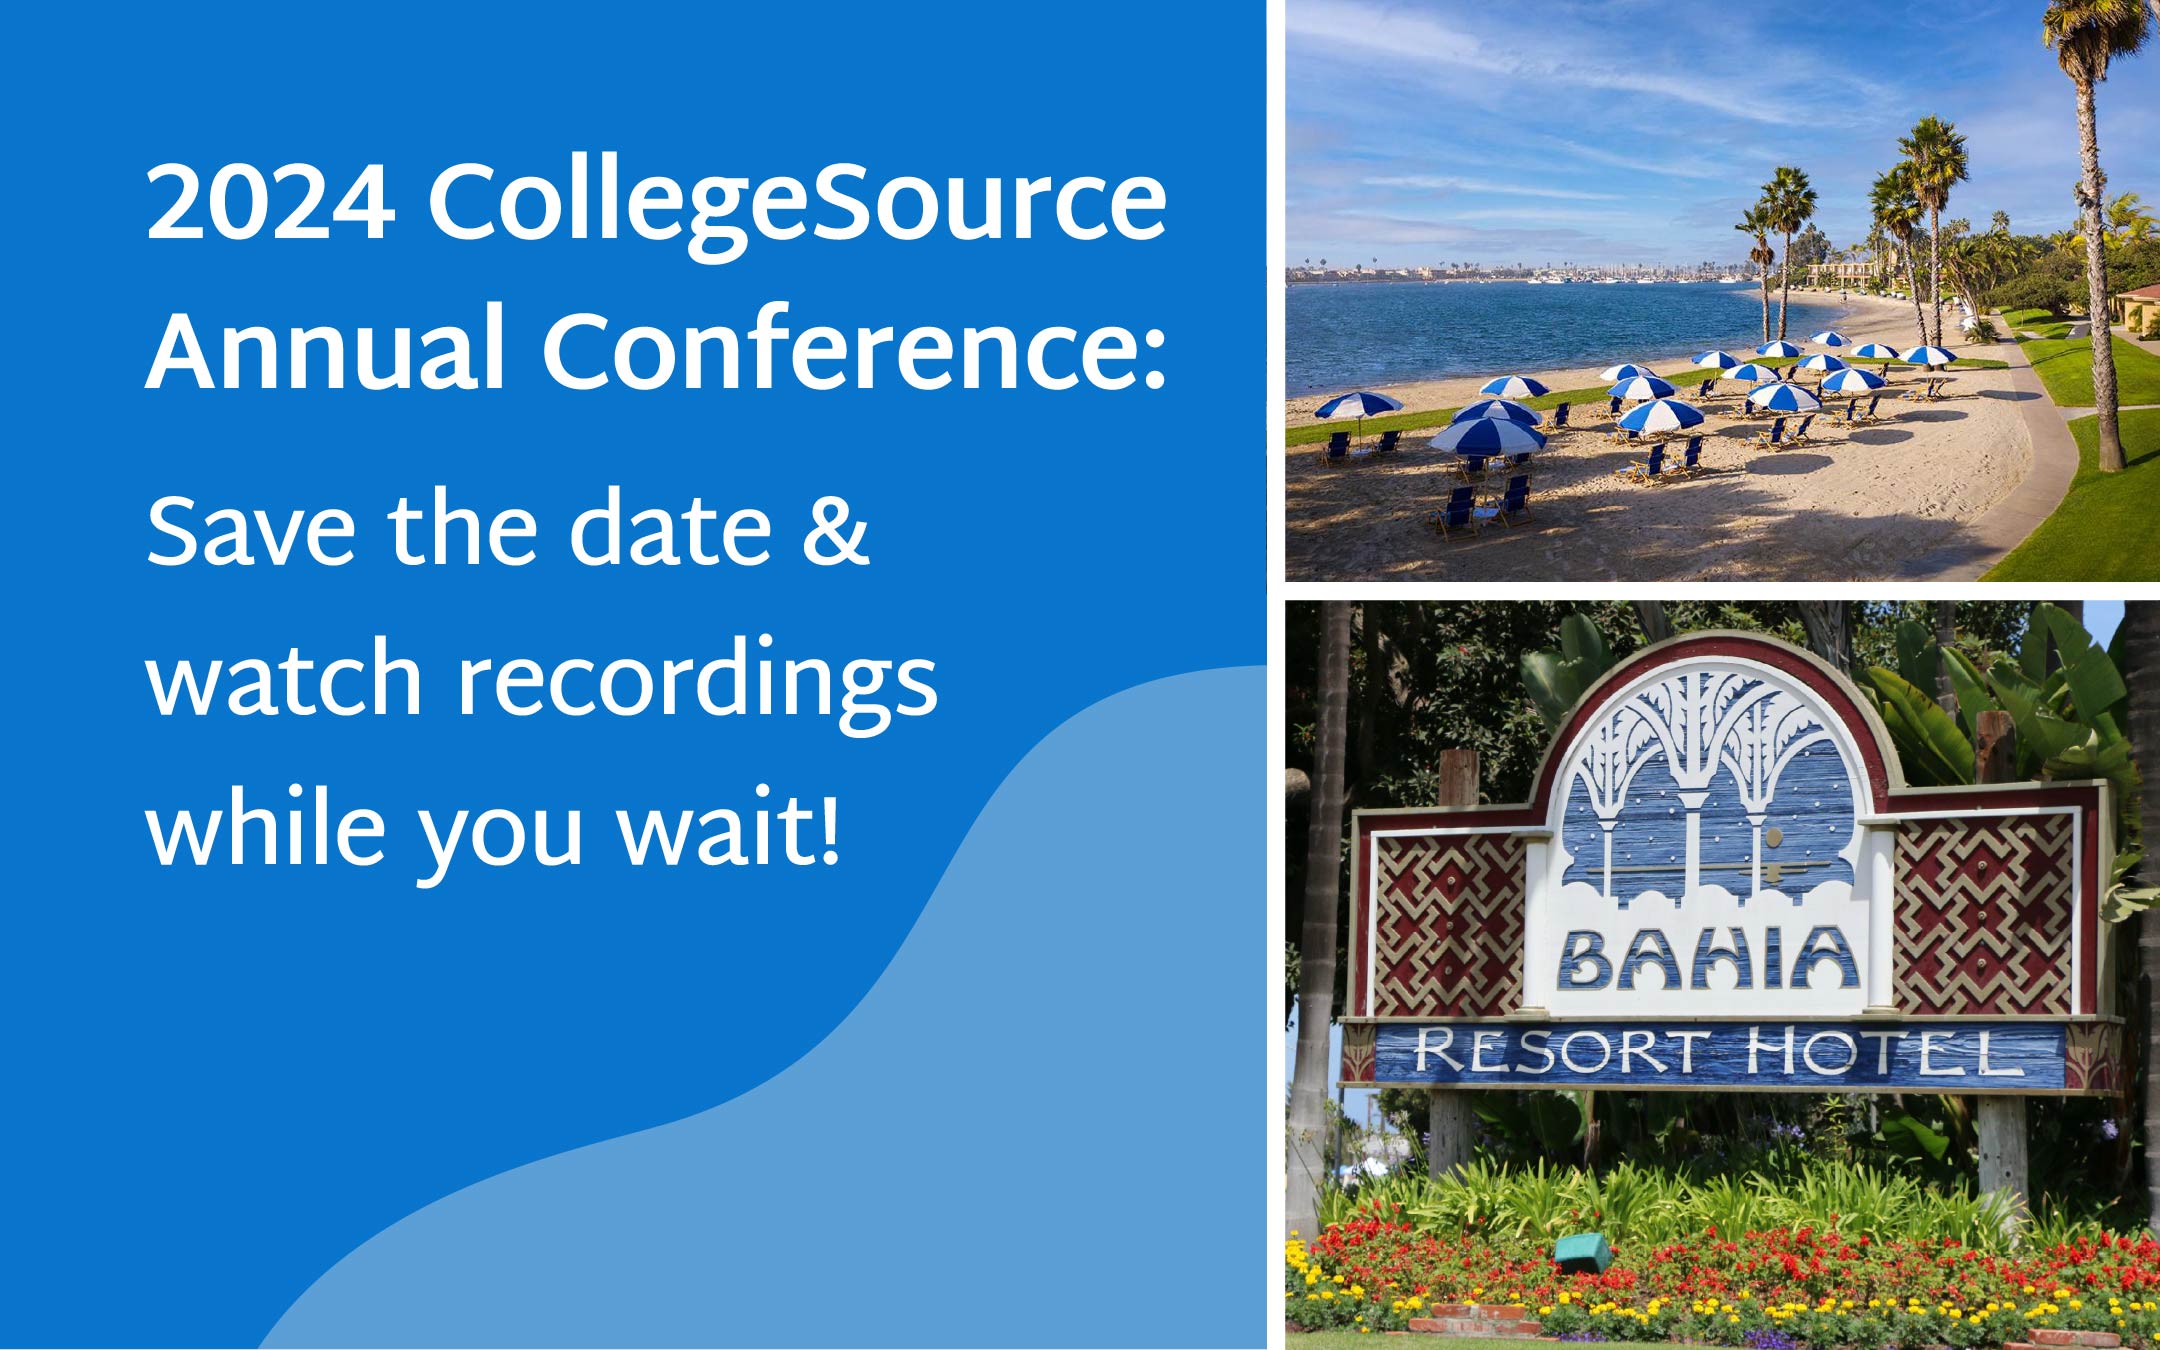 2024-CollegeSource-Annual-Conference-Save-the-Date-at-Bahia